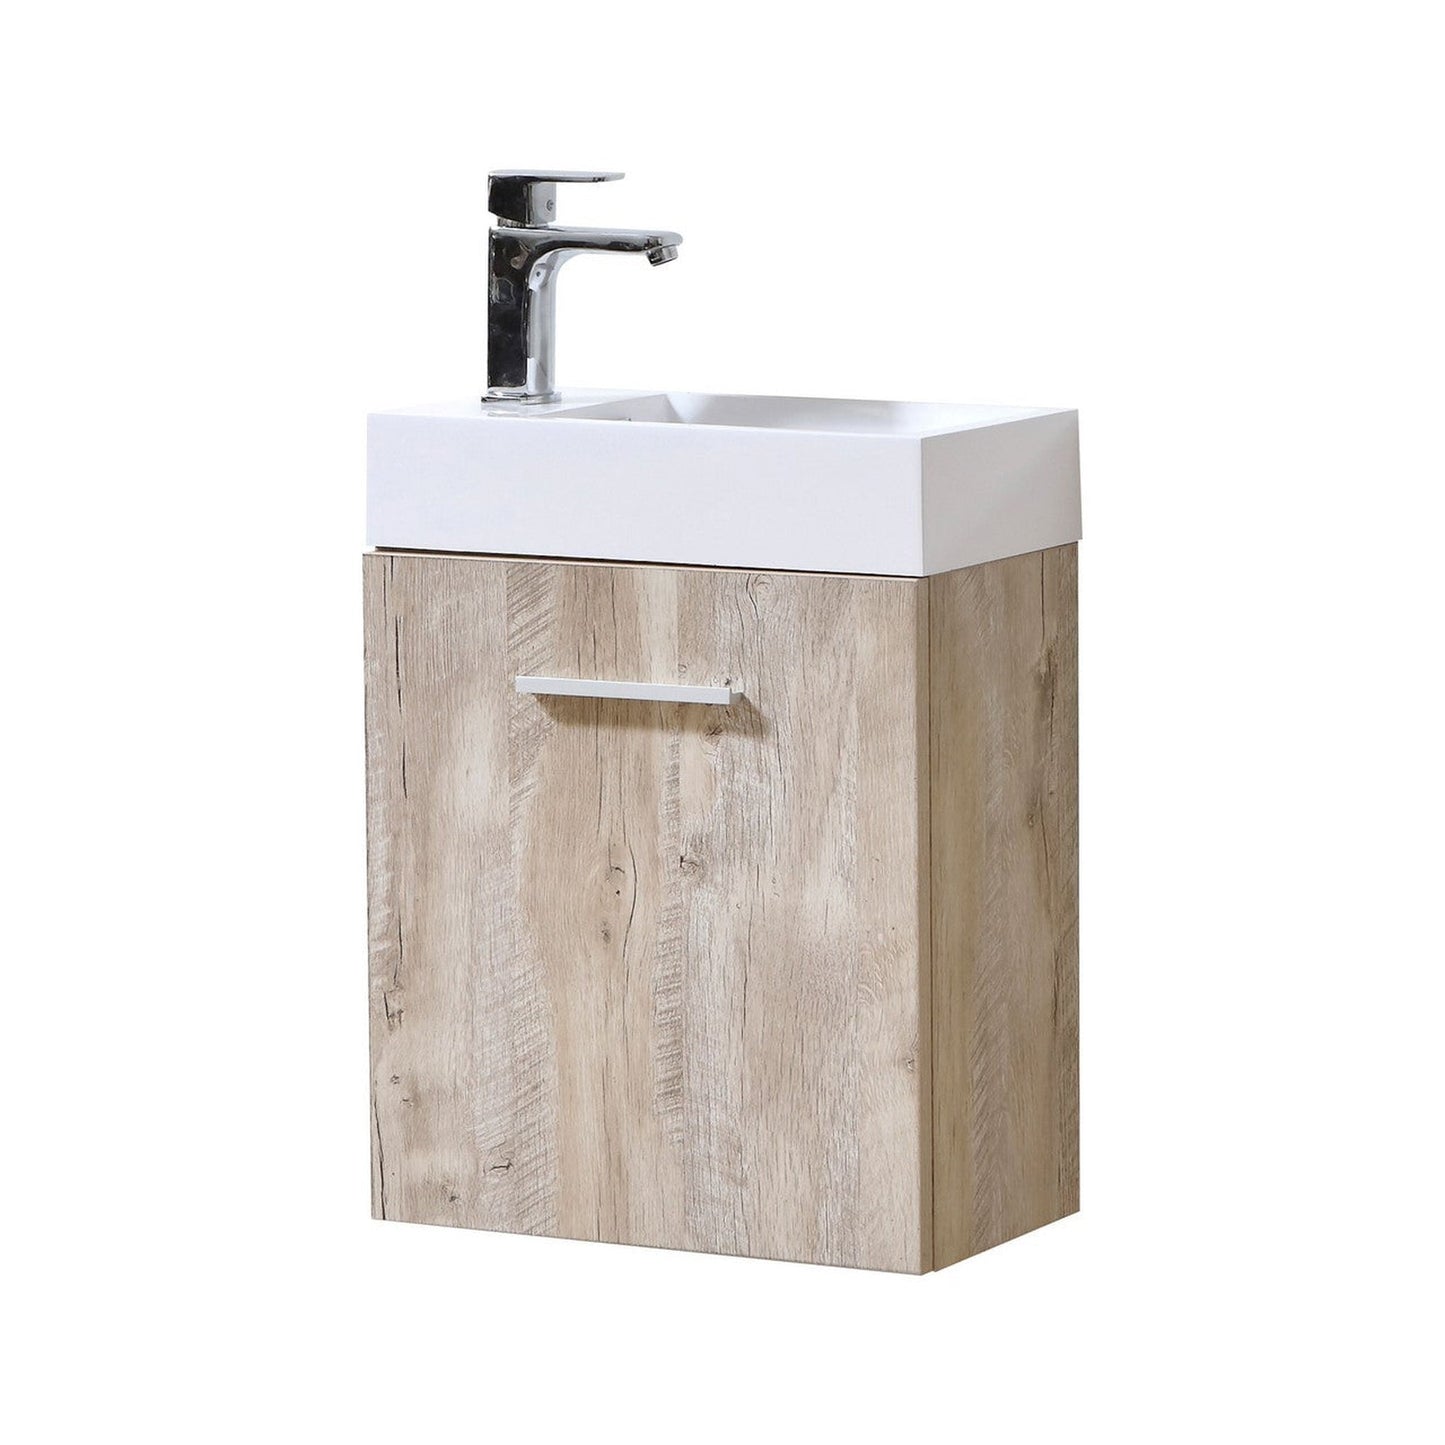 KubeBath Bliss 18" Nature Wood Wall-Mounted Modern Bathroom Vanity With Single Integrated Acrylic Sink With Overflow and 24" Wood Framed Mirror With Shelf